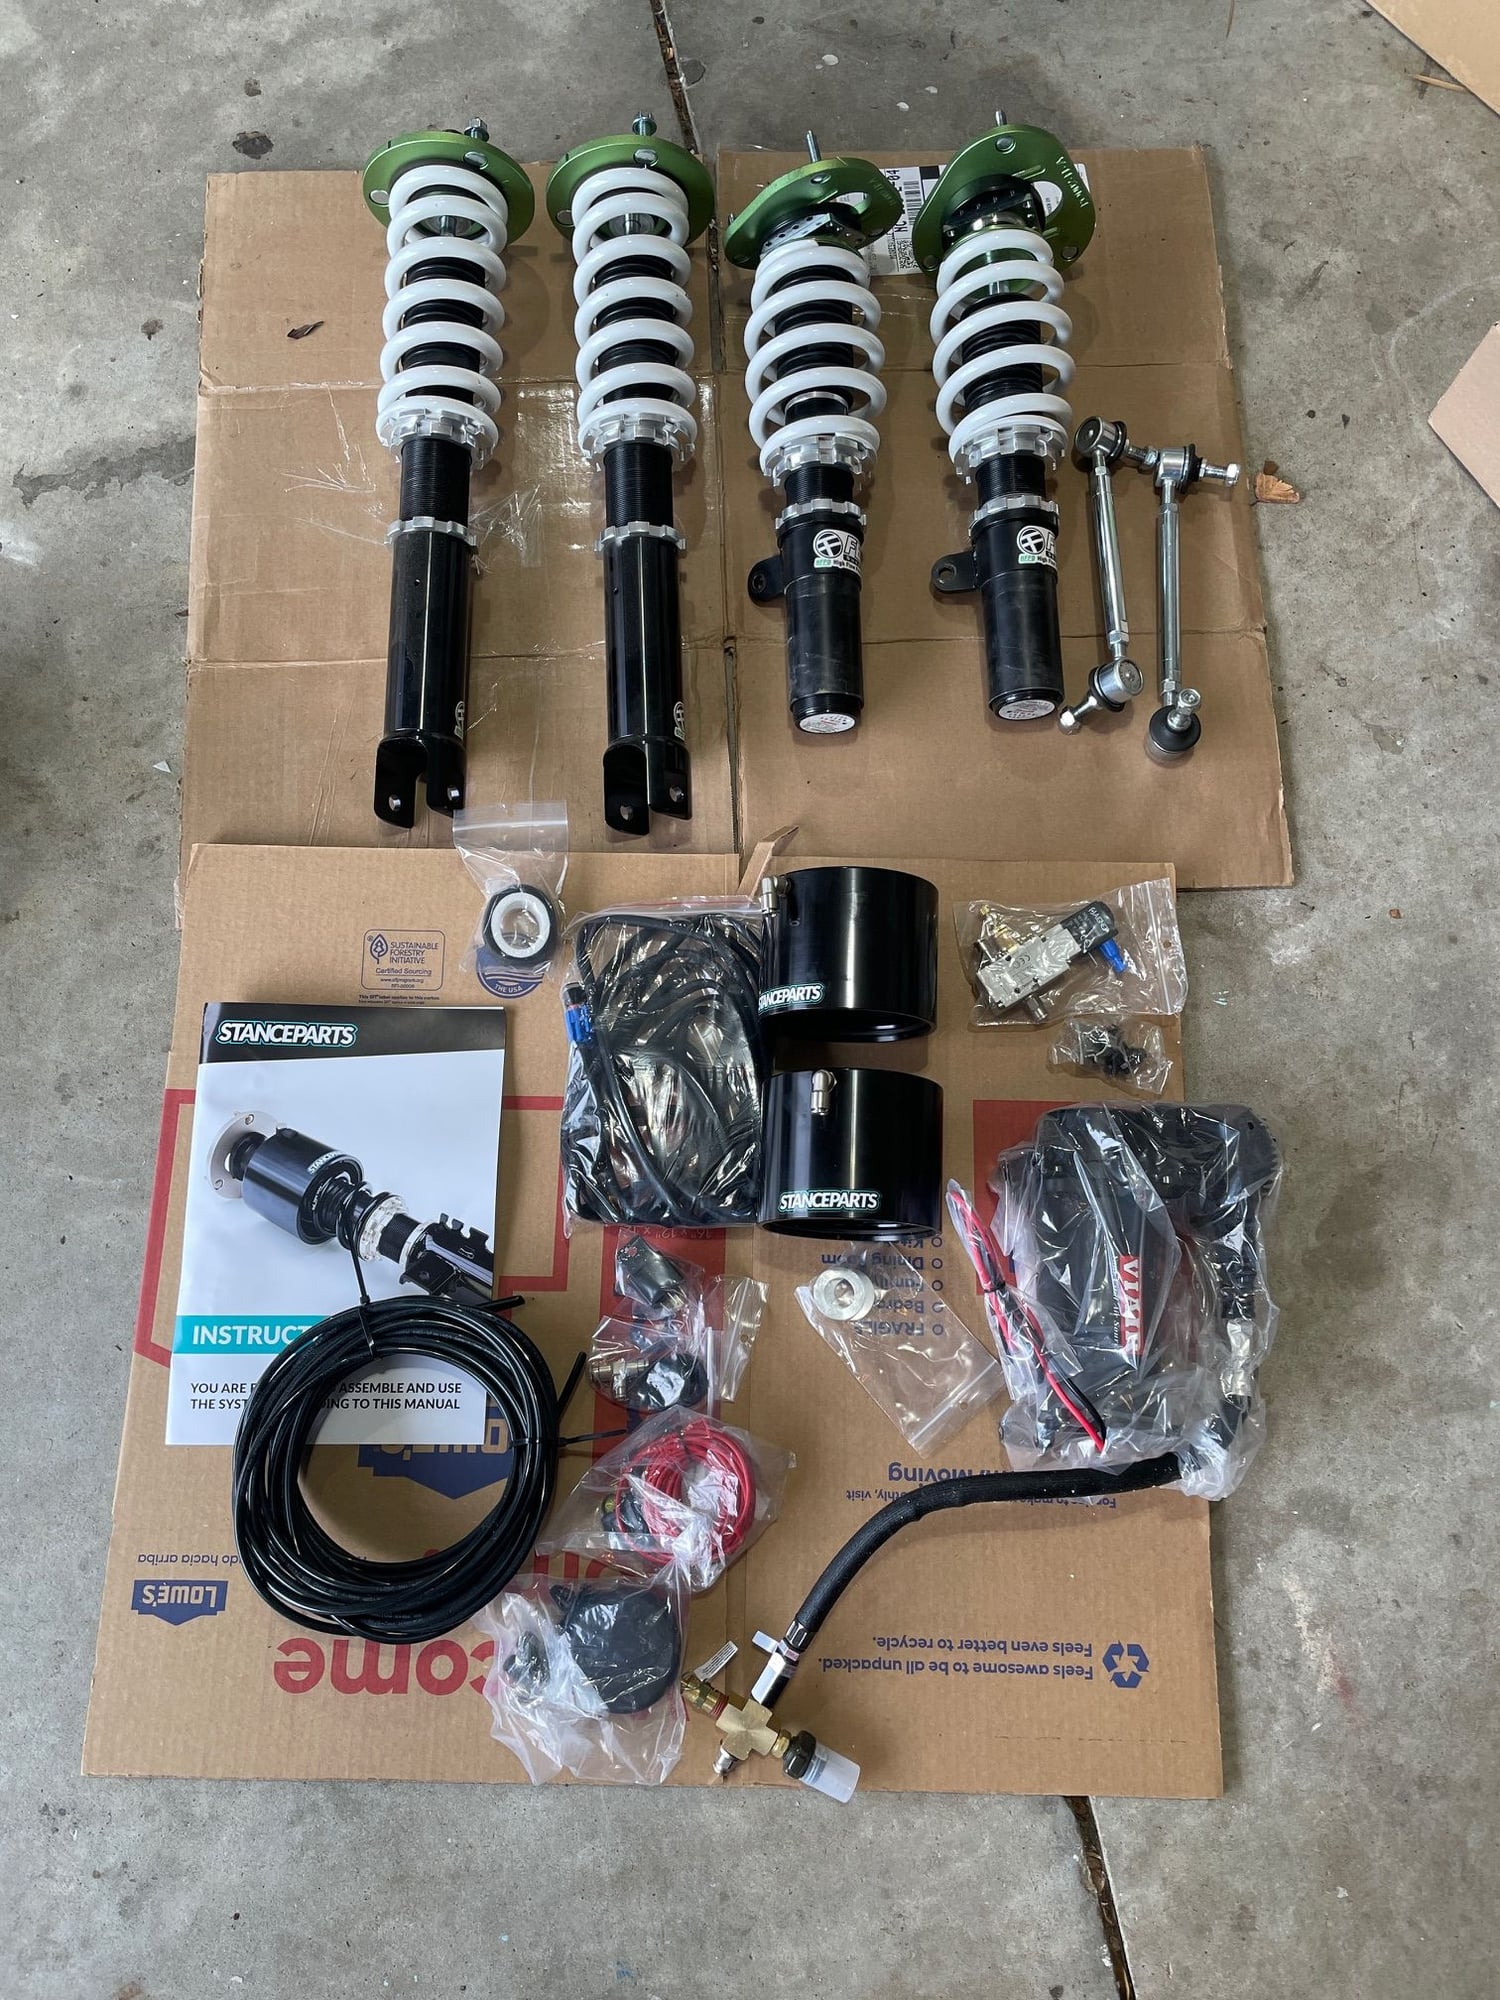 Steering/Suspension - Feal 441 Coilvers + StanceParts Front Air Cups - 997 C4/C4S/Turbo - Used - Mooresville, NC 28117, United States